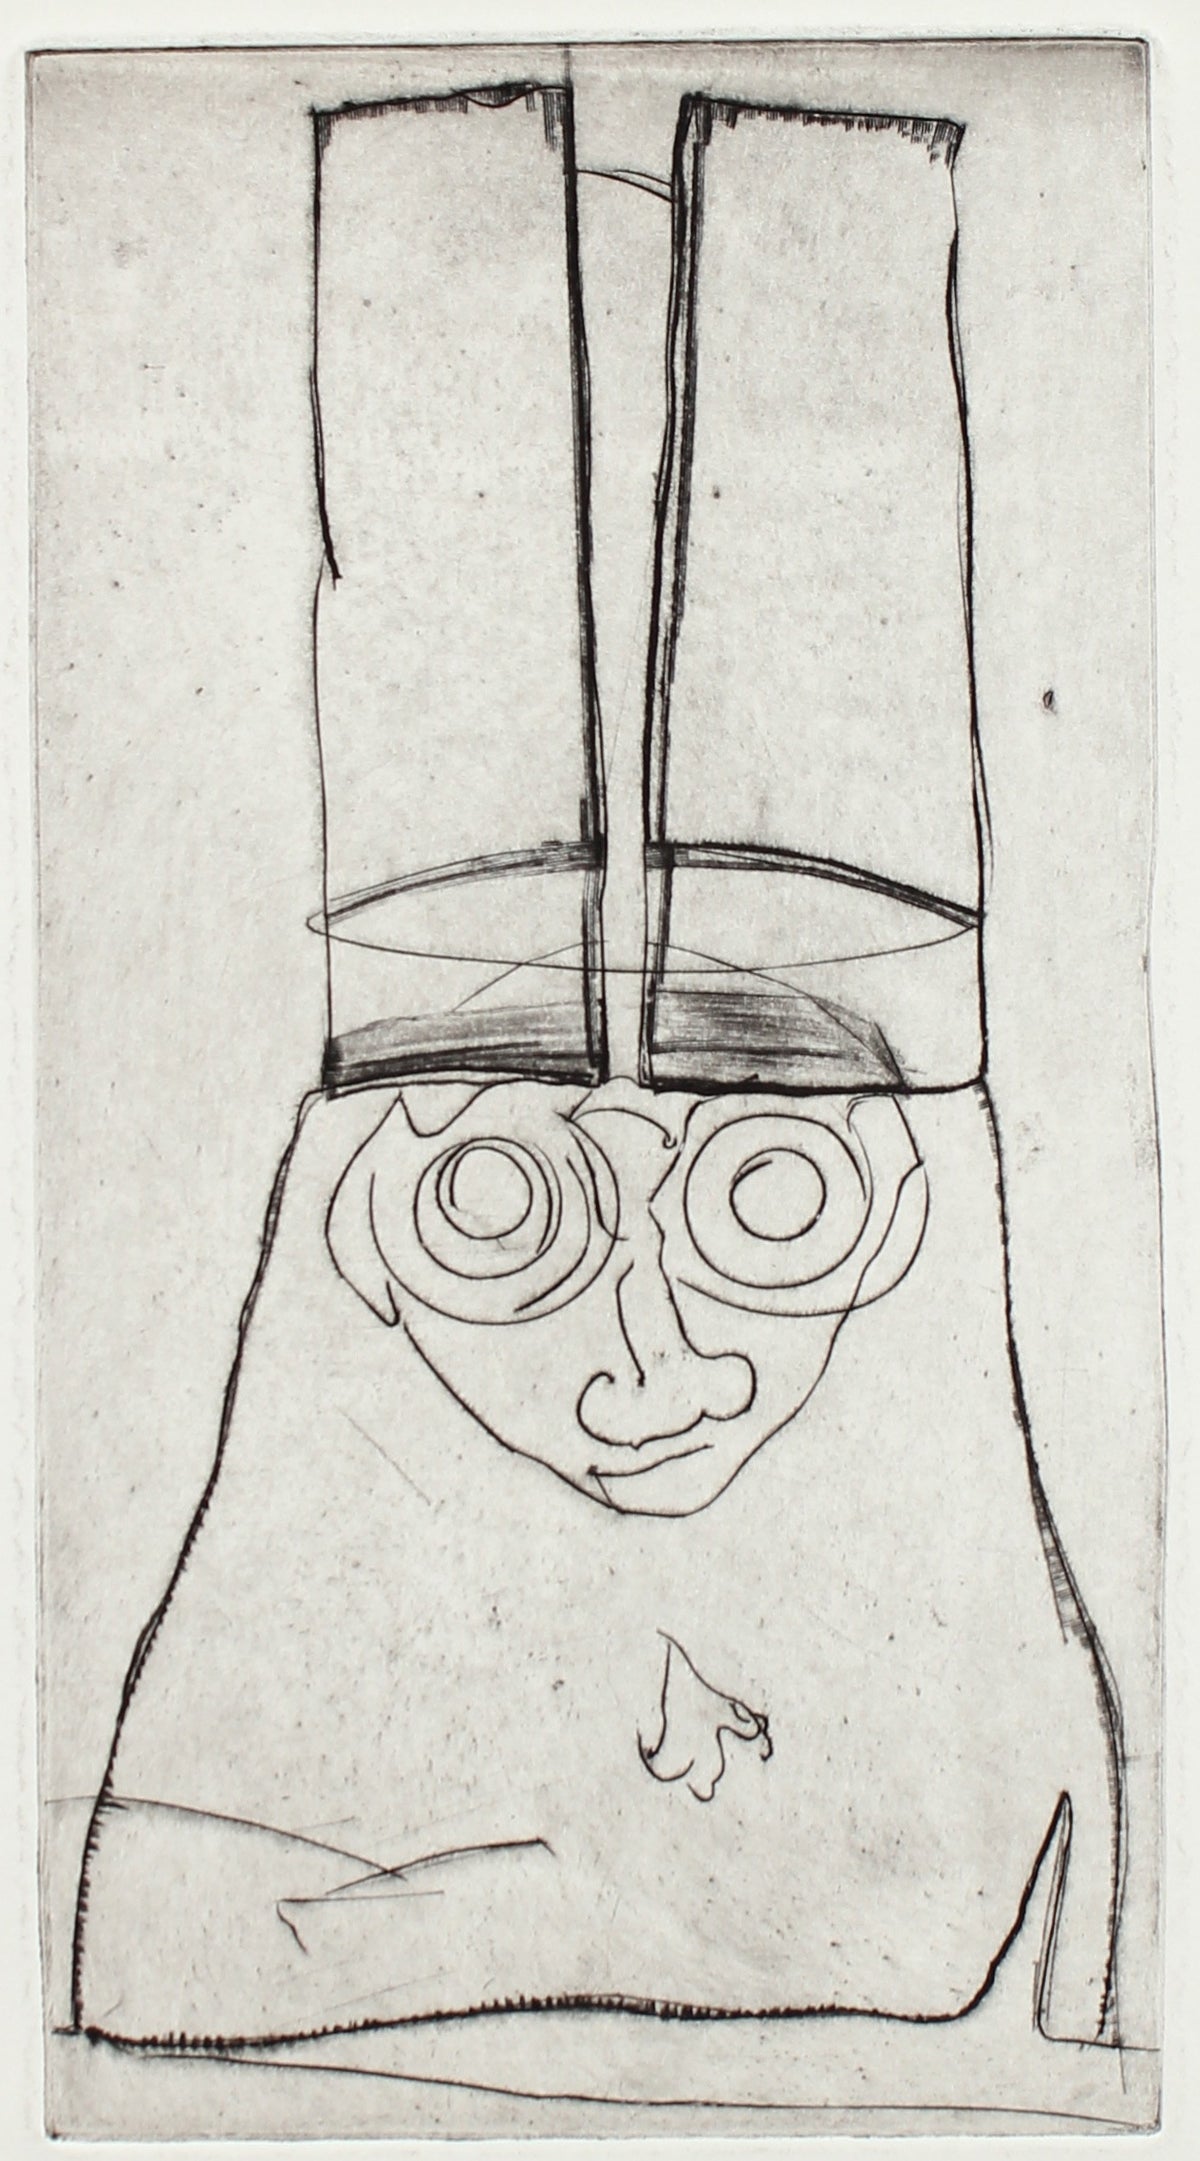 Man in a Tall Hat &lt;br&gt;Etching, 1960-70s &lt;br&gt;&lt;br&gt;#2150A